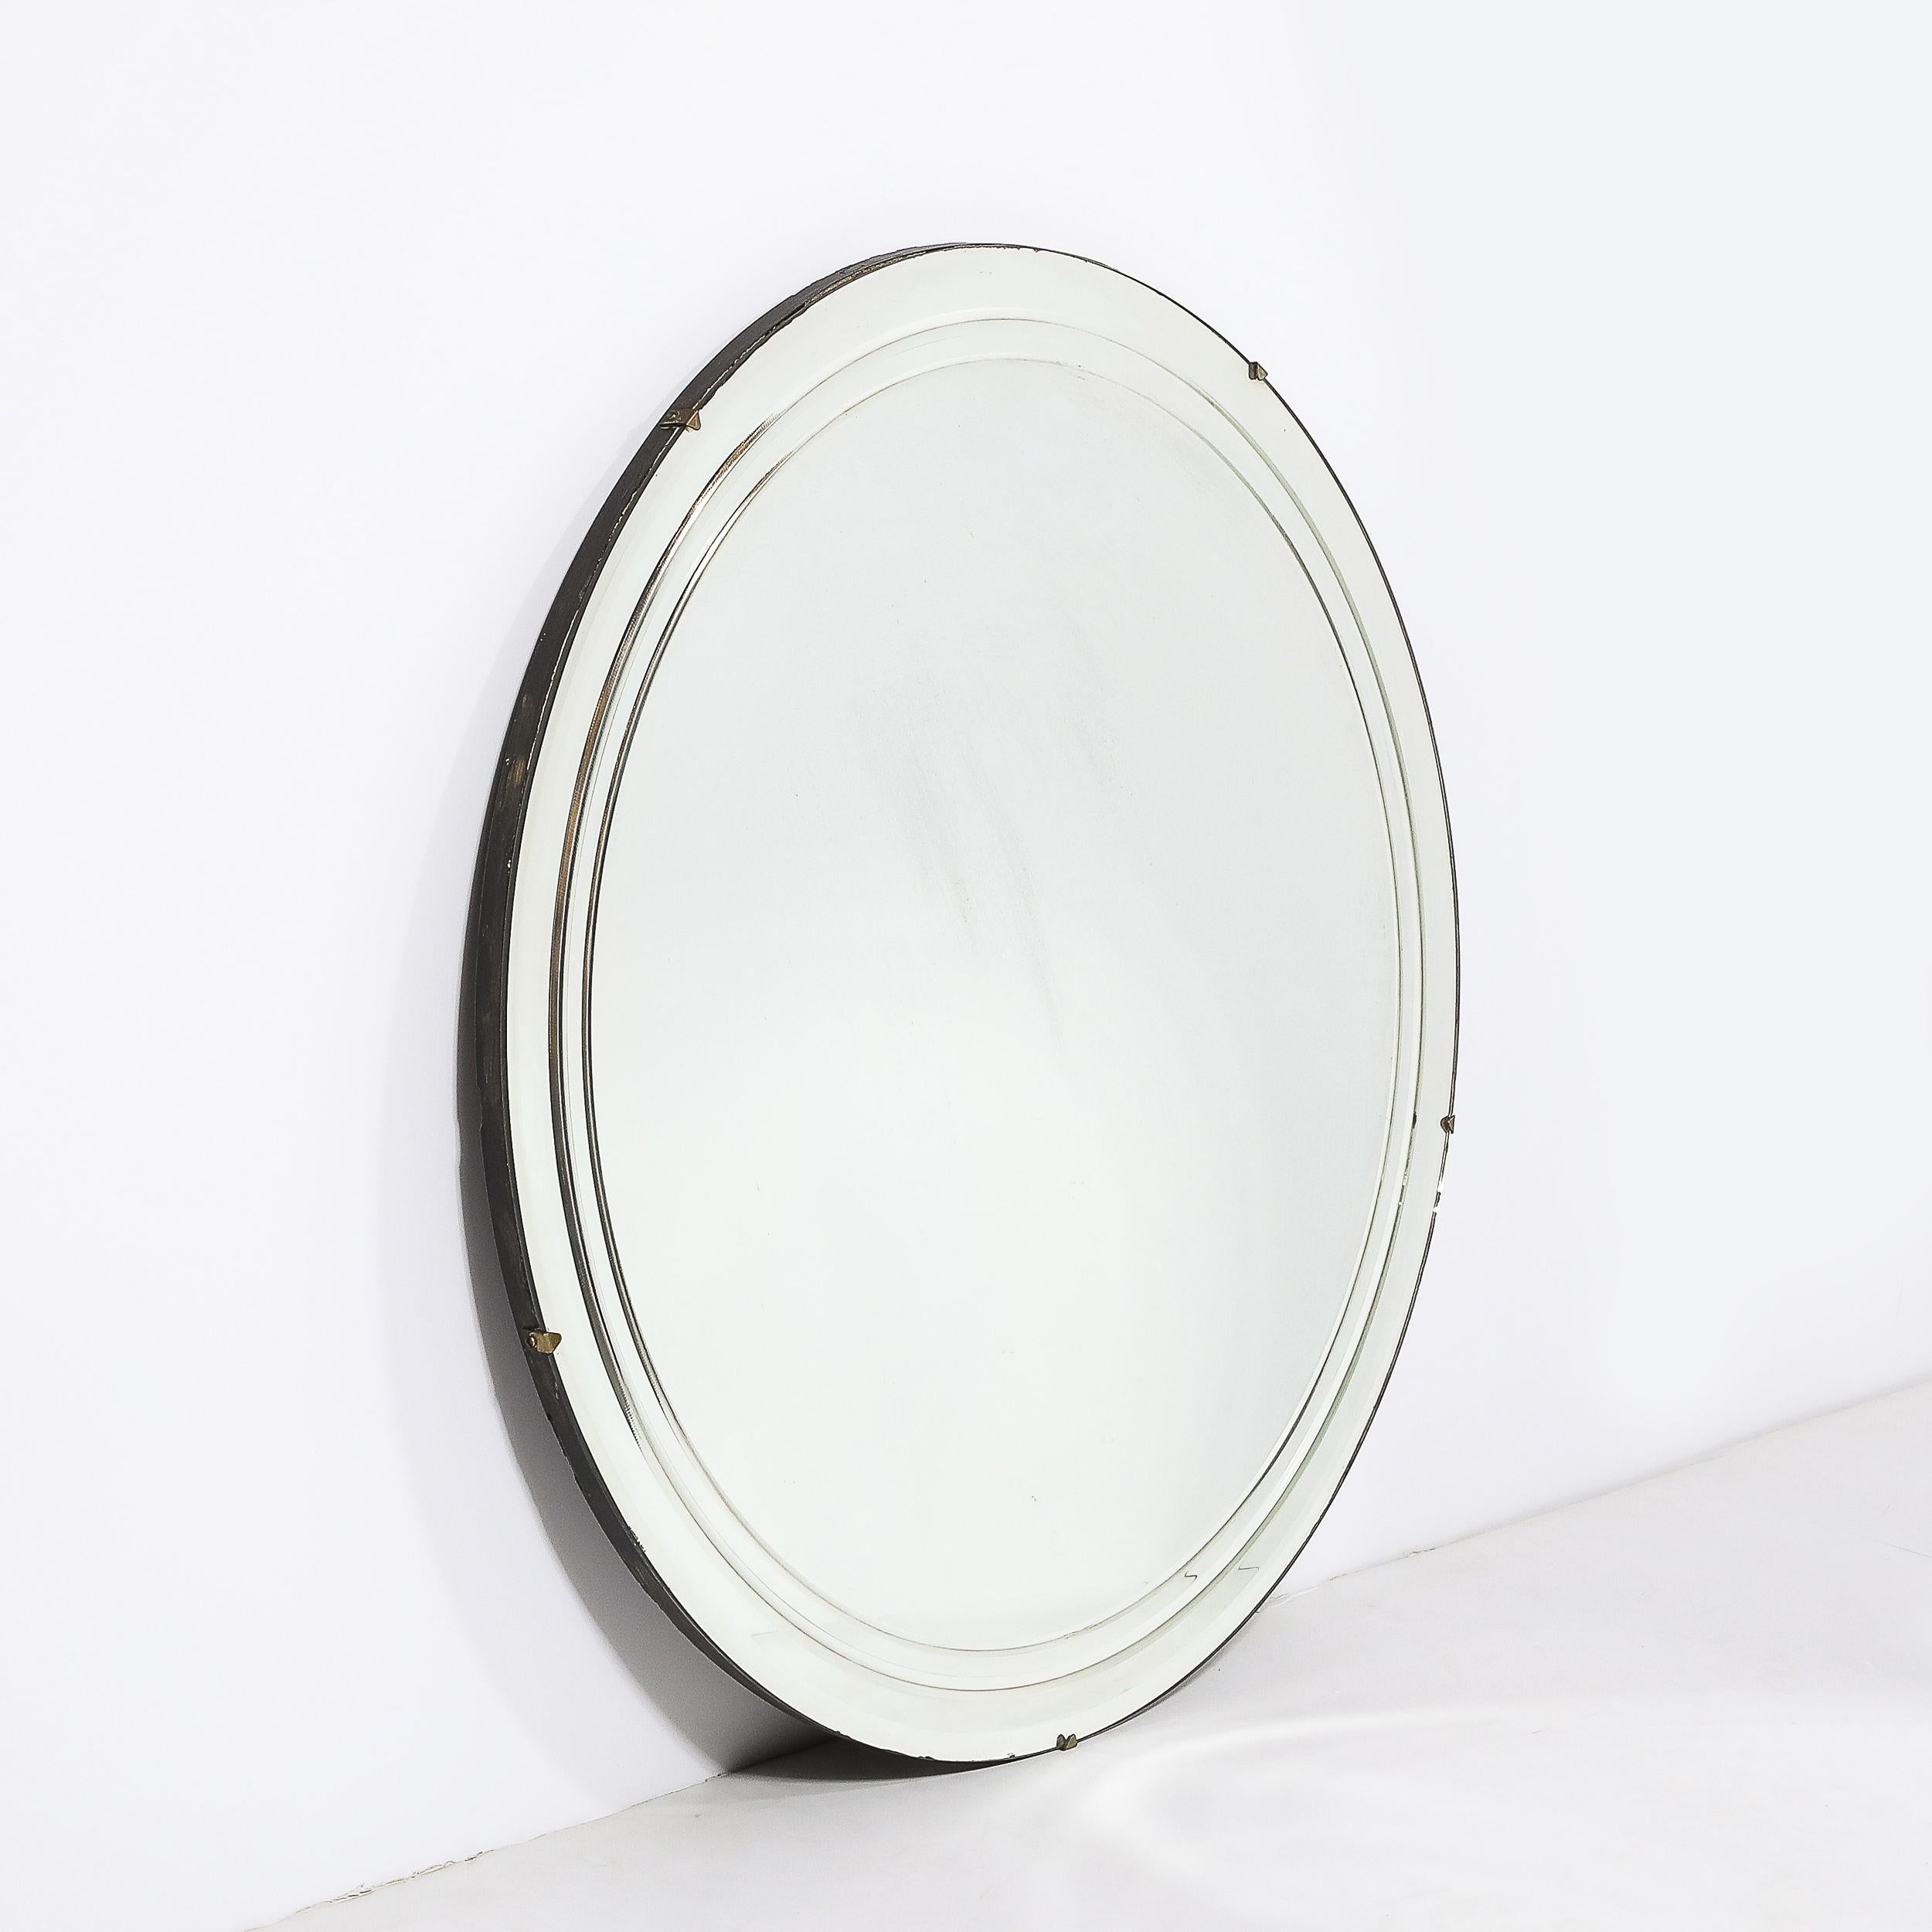 This materially dynamic and sleek Art Deco Machine Age Round Mirror W/Reverse Tiered Bevel Detailing & Brass Fittings originates from the United States, Circa 1935. Features a round silhouette beautifully scaled and proportioned, putting the